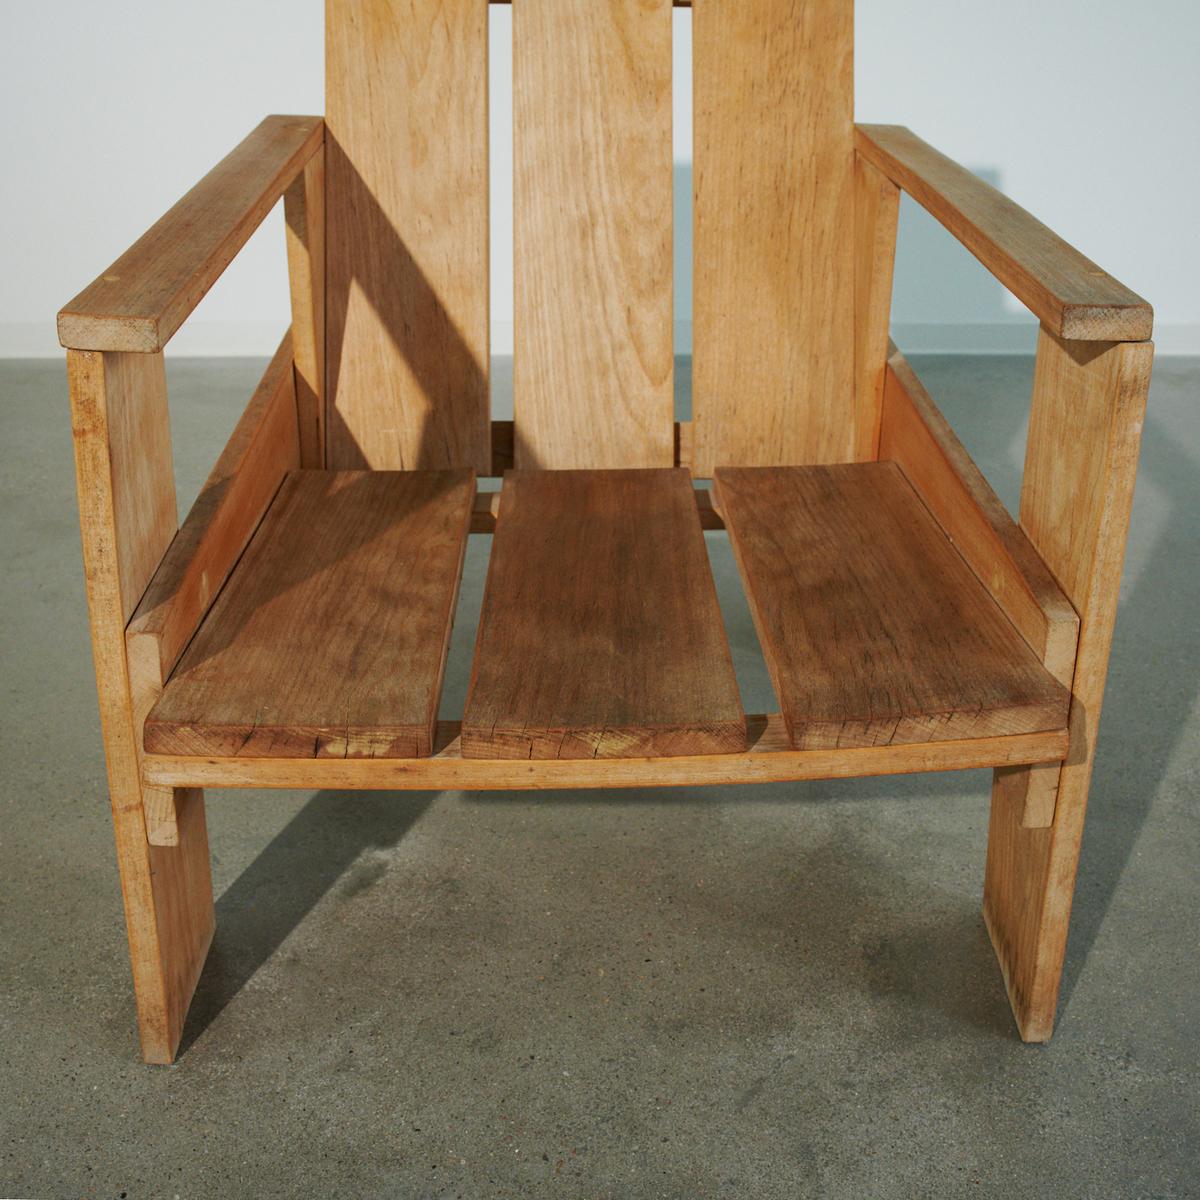 ‘Crate’ chair in wood, Attributed to Gerrit Rietveld

Additional information: 
Material: Wood
Designer: Gerrit Rietveld
Size: 61 W x 54 D x 70 H cm.